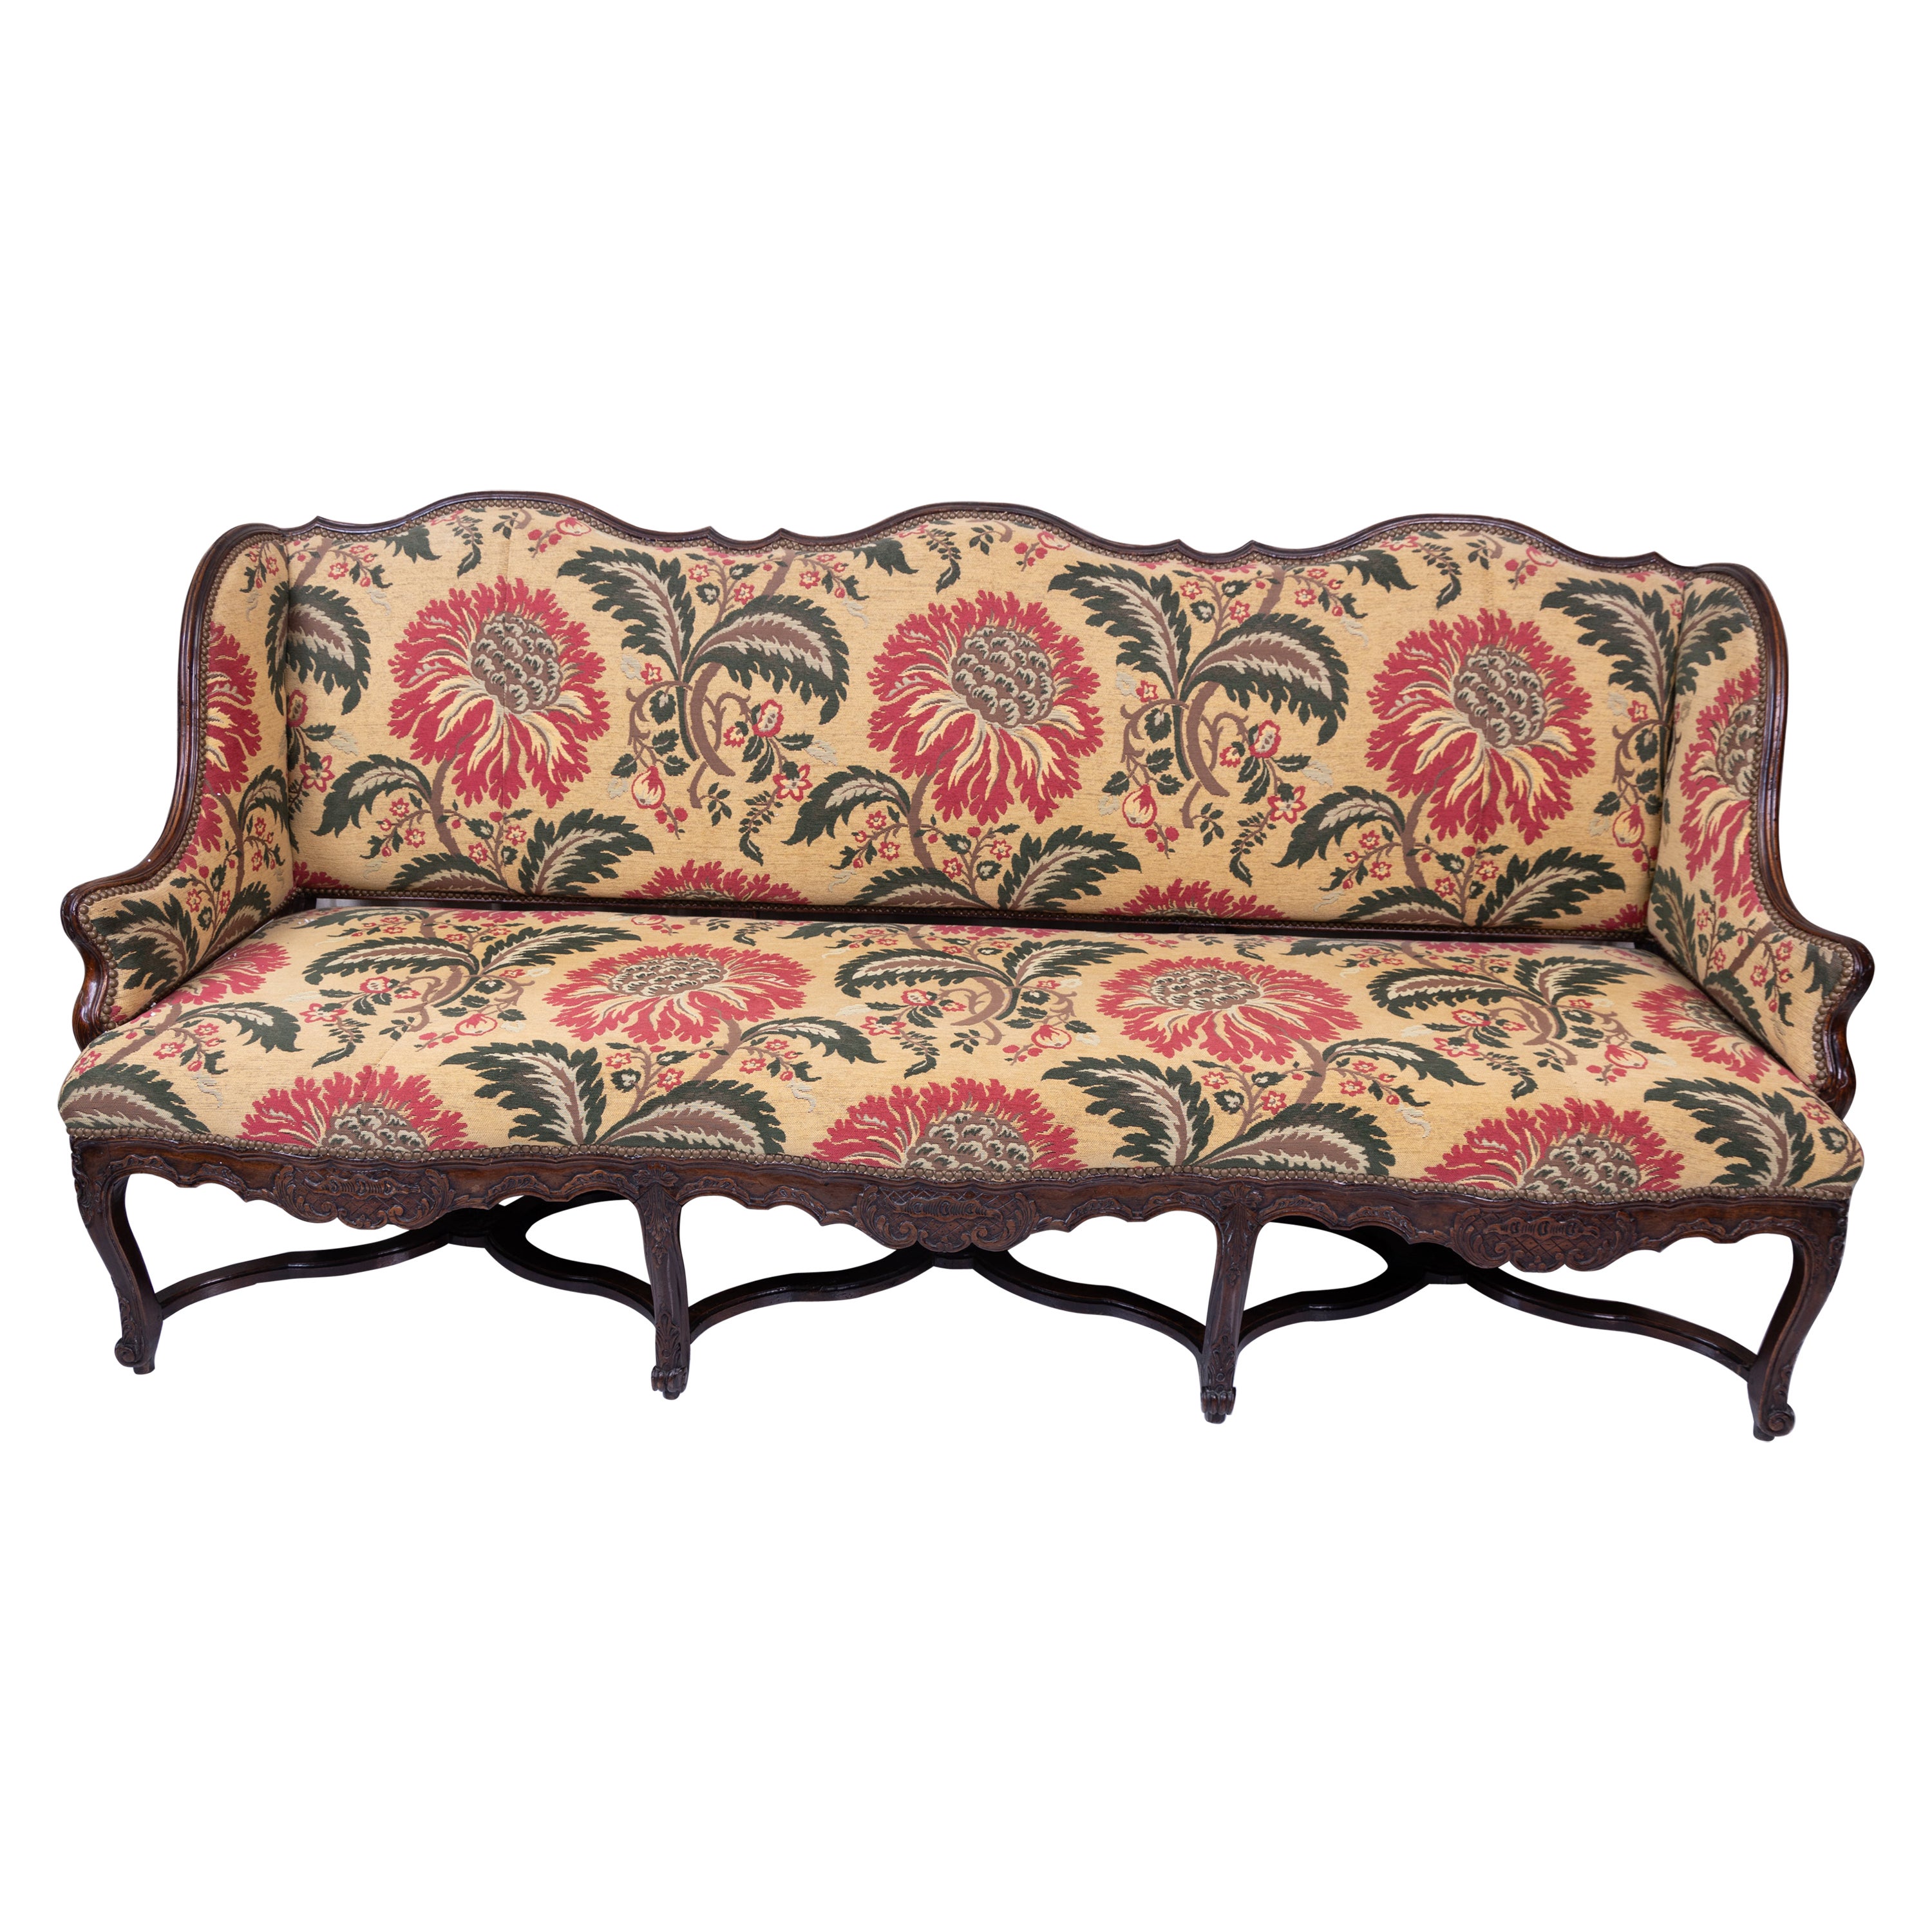 Exquisite 18th Century Walnut Regence Sofa Upholstered in Fine Silk For Sale